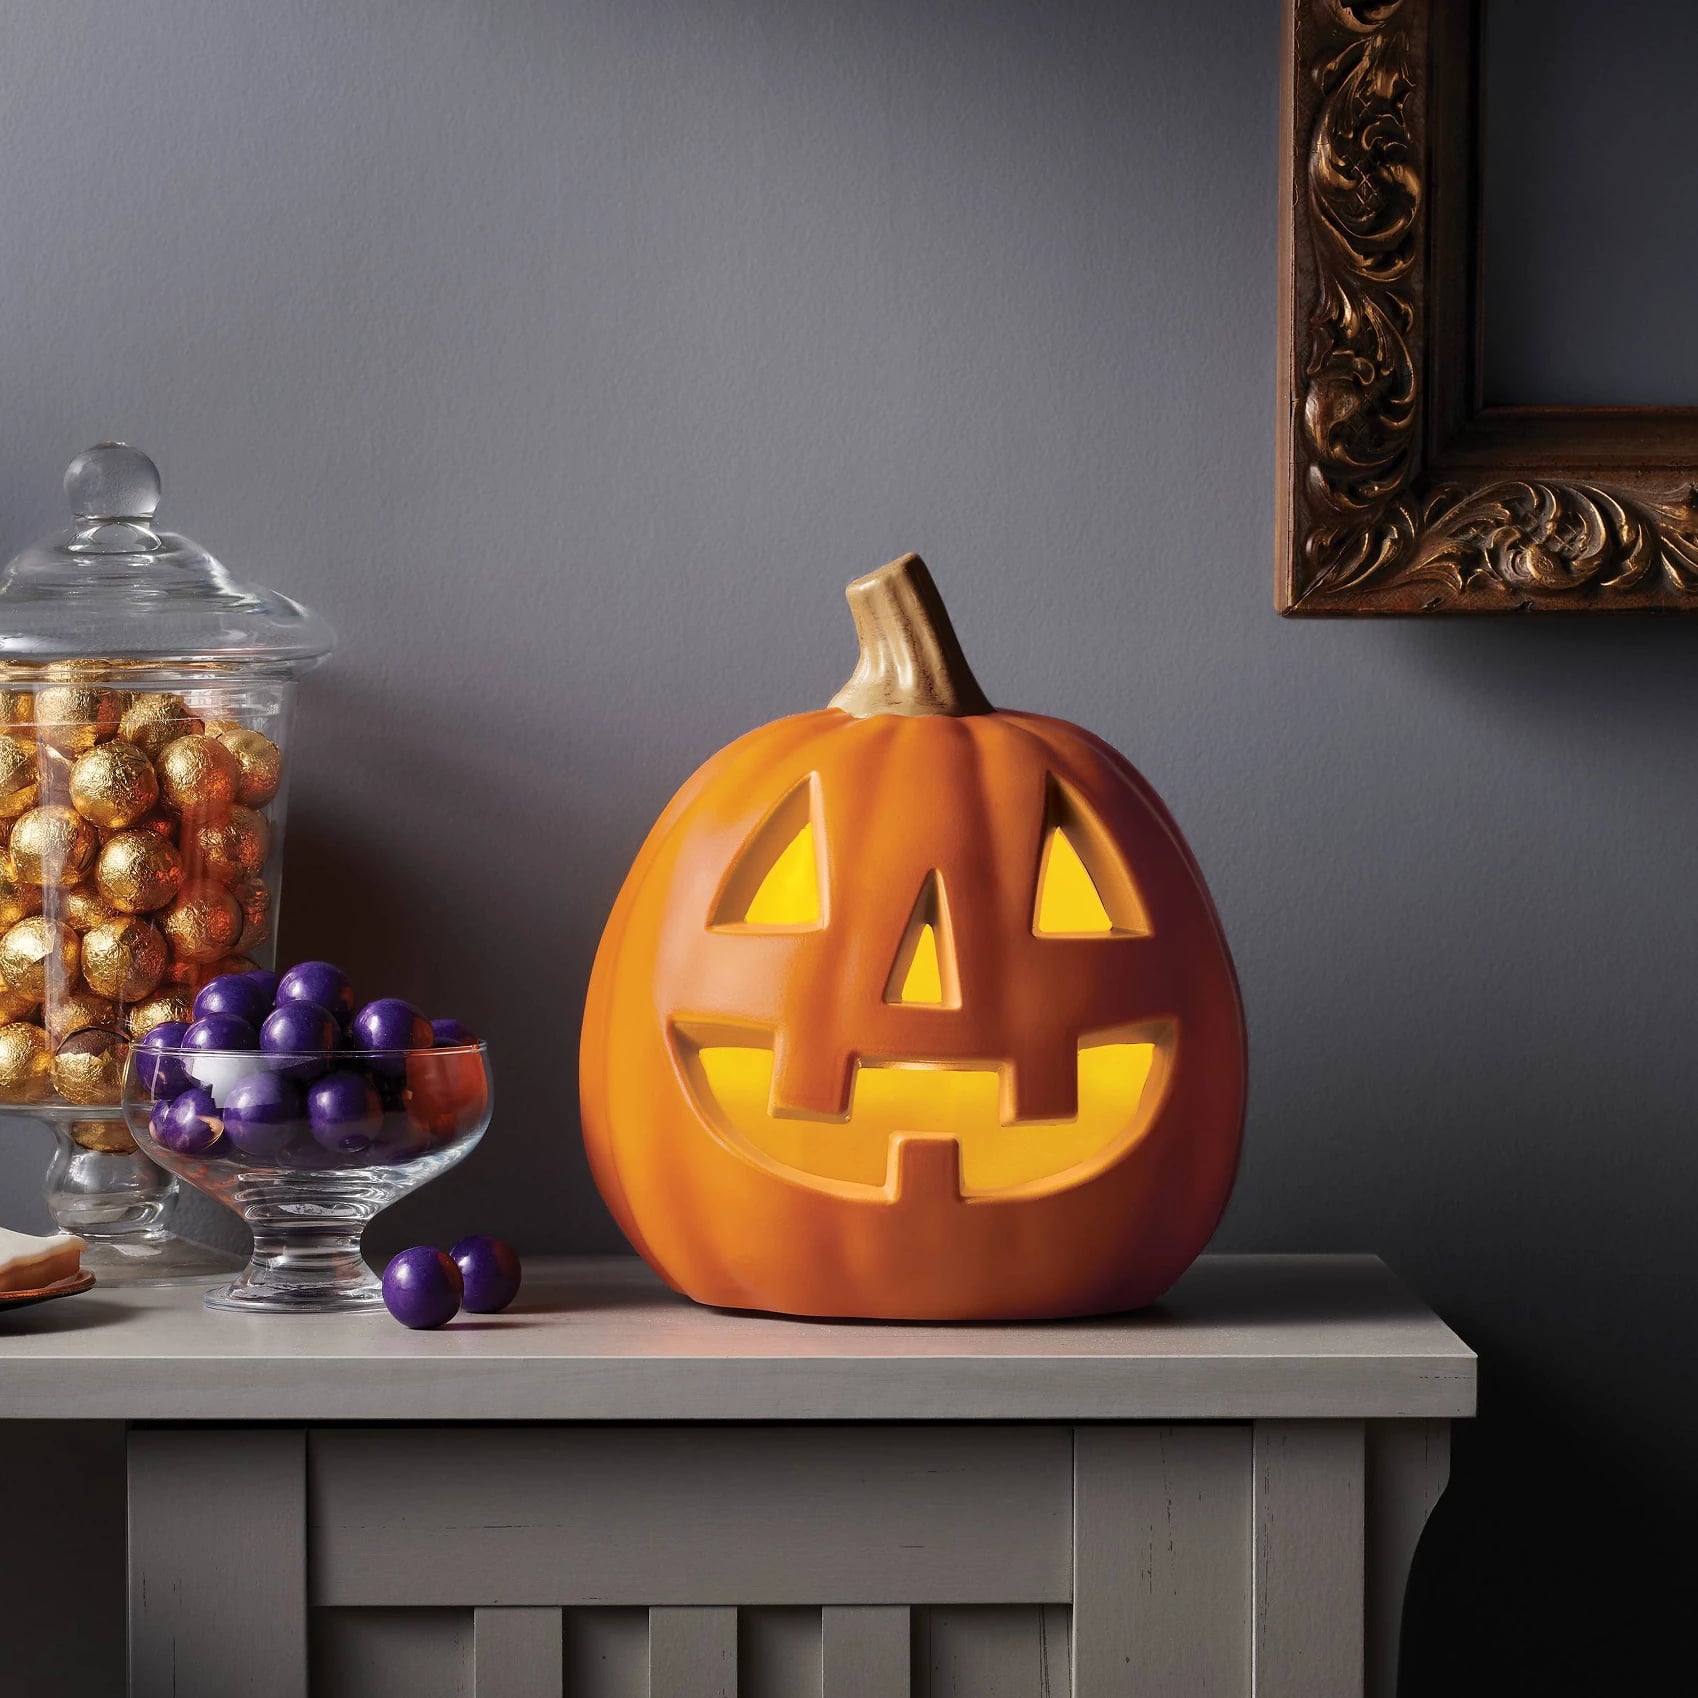 Light Up Orange Happy Face Halloween Jack O Lantern Prepare For A Scare Target S 2020 Halloween Decorations Have Arrived For The Season Popsugar Home Photo 62,Fried Corn On The Cob